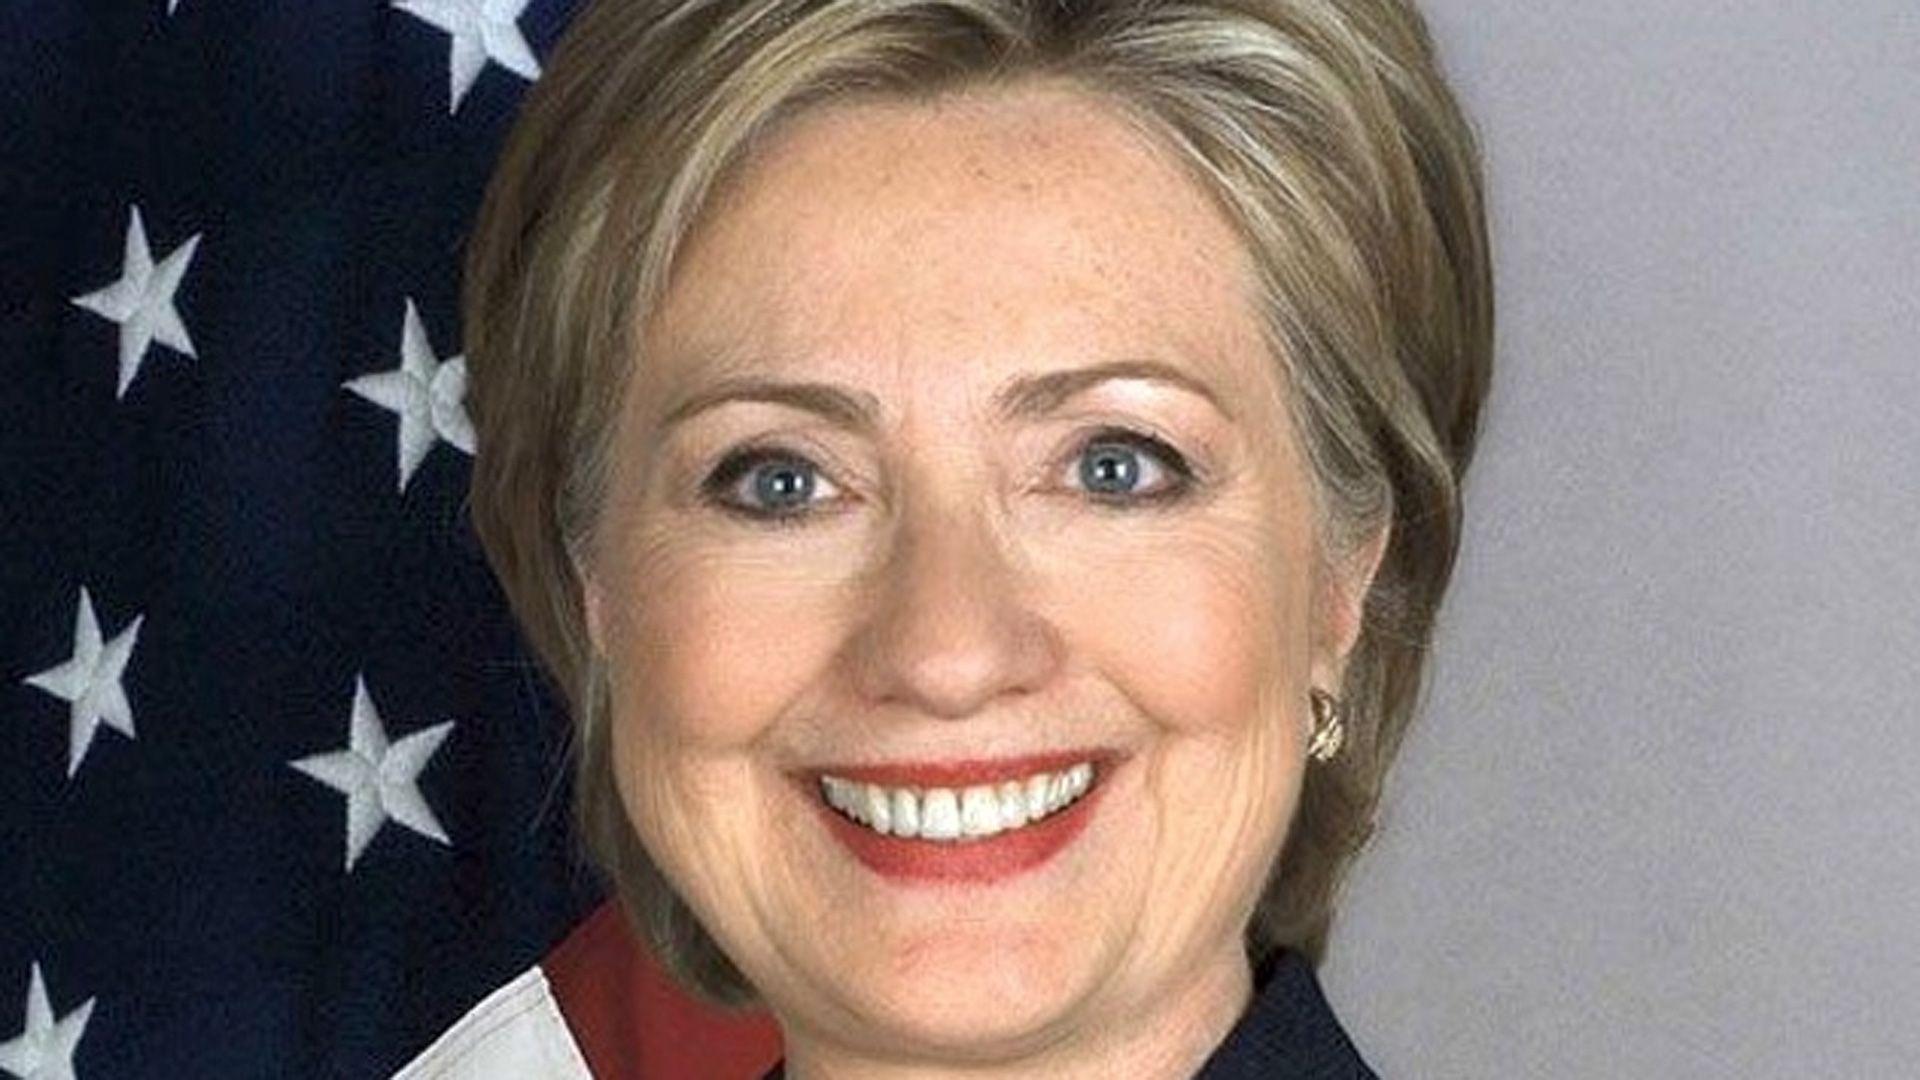 Download Hillary Clinton For President iPhone 6 Plus HD